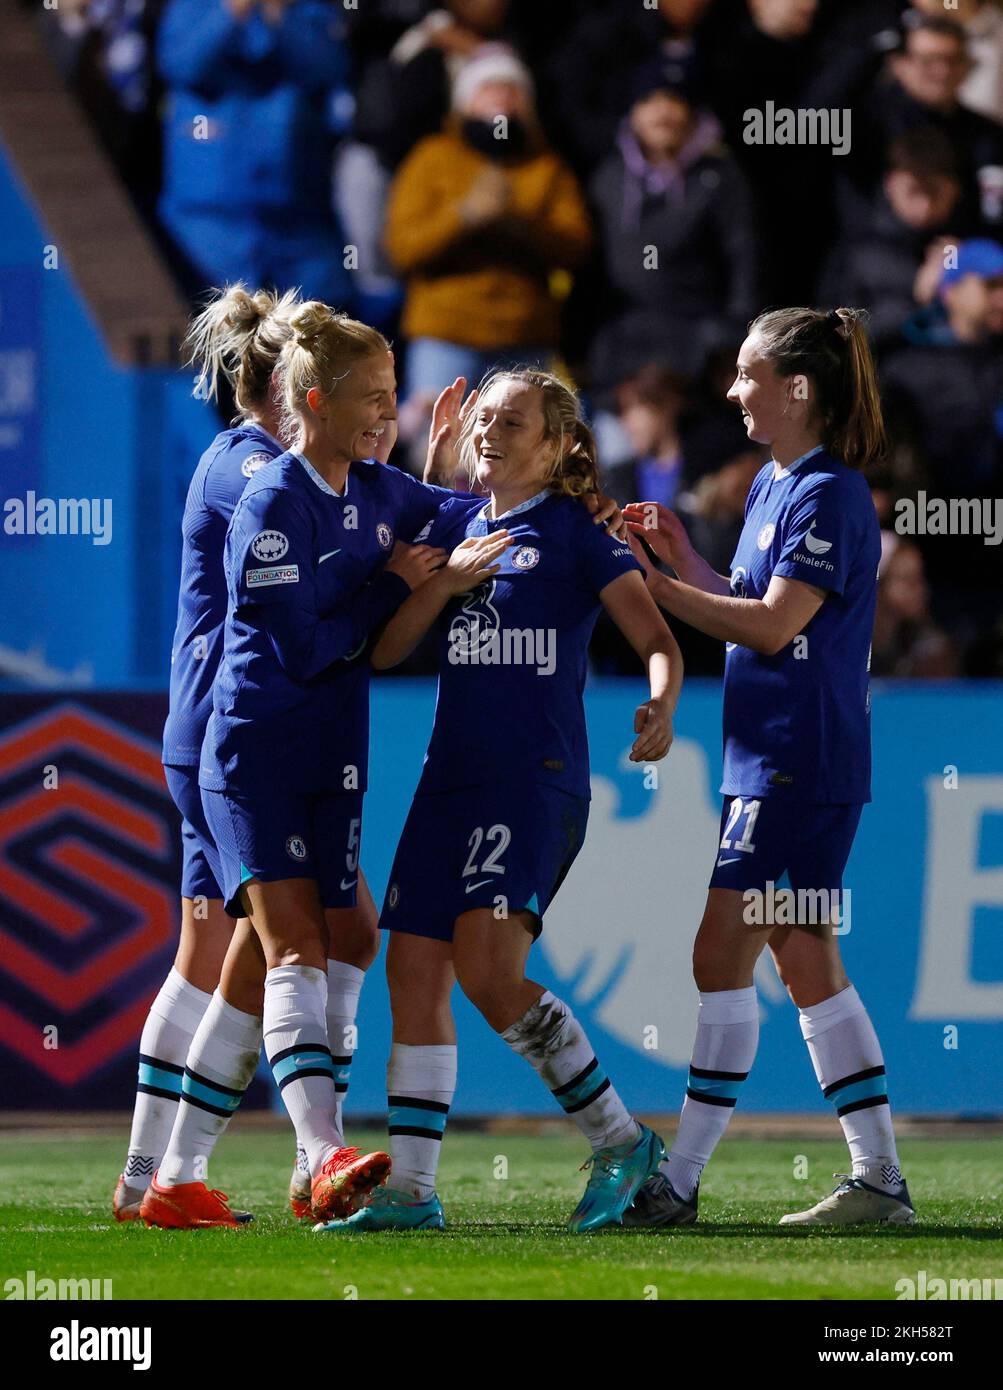 Soccer Football - Women's Champions League - Group A - Chelsea v Real Madrid - Kingsmeadow, London, Britain - November 23, 2022 Chelsea's Erin Cuthbert celebrates scoring their second goal with teammates REUTERS/Andrew Couldridge Stock Photo